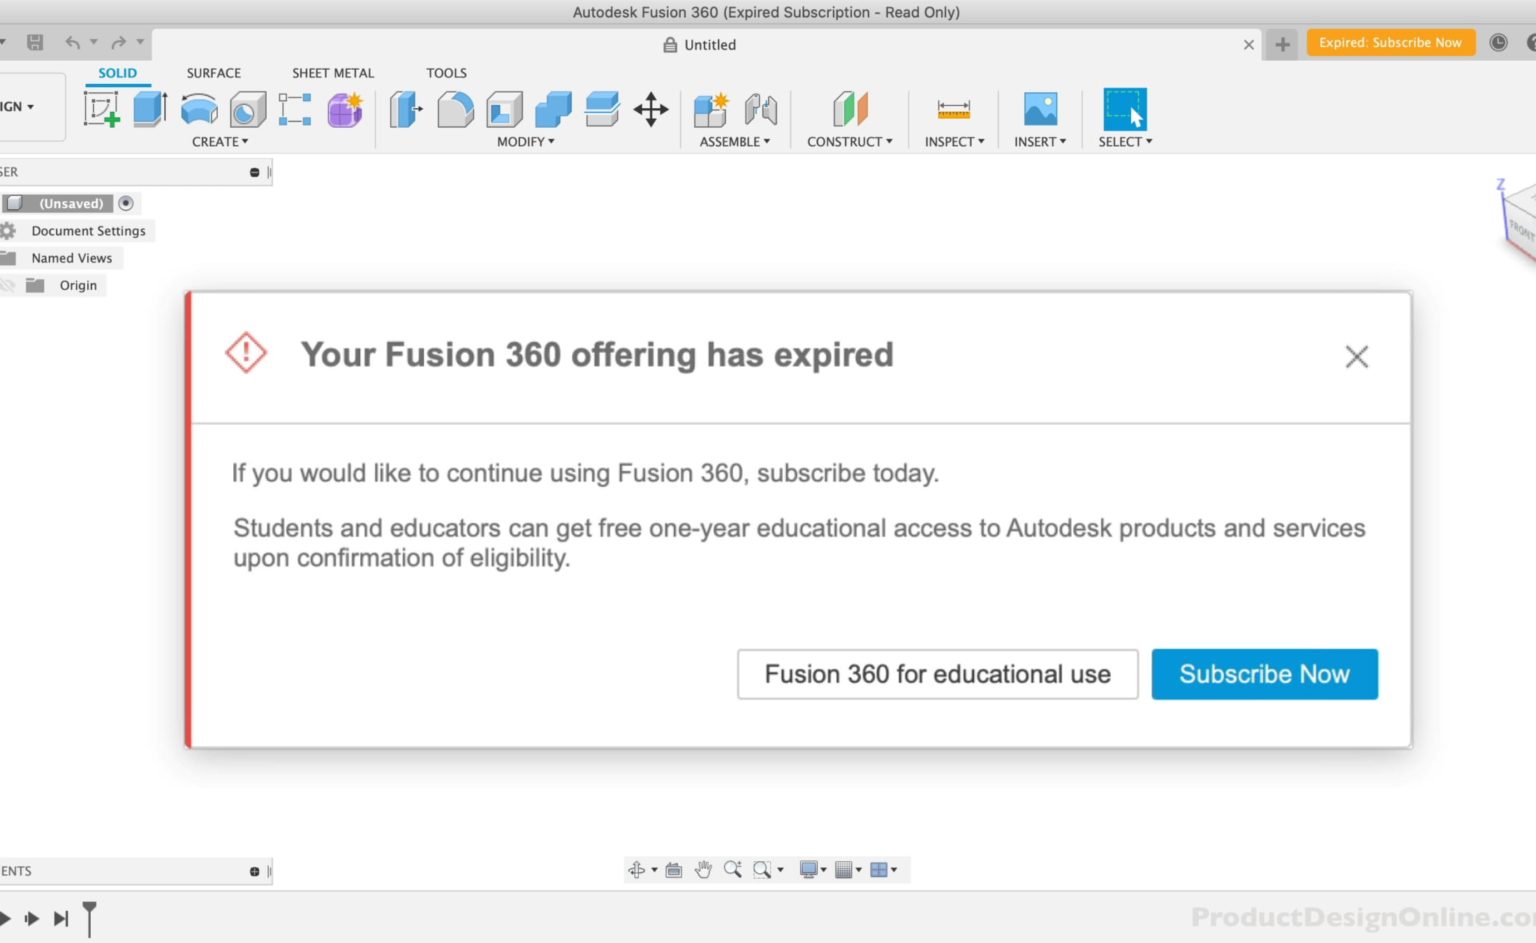 Fusion 360 Personal Use offering has expired